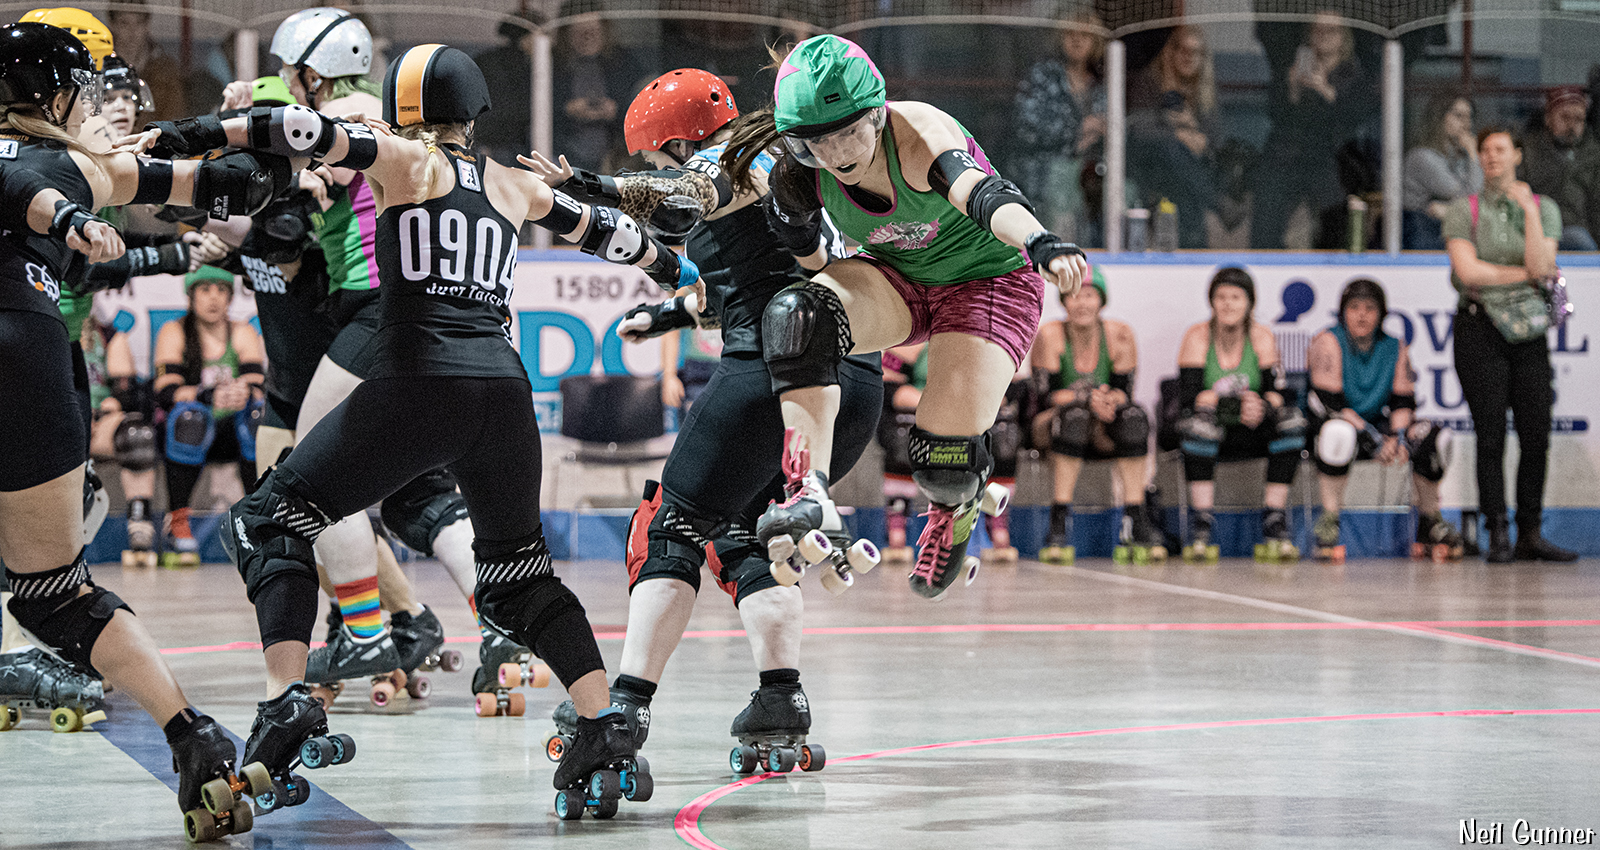 Home Page hero image 6: Roller derby jammer jumps the apex